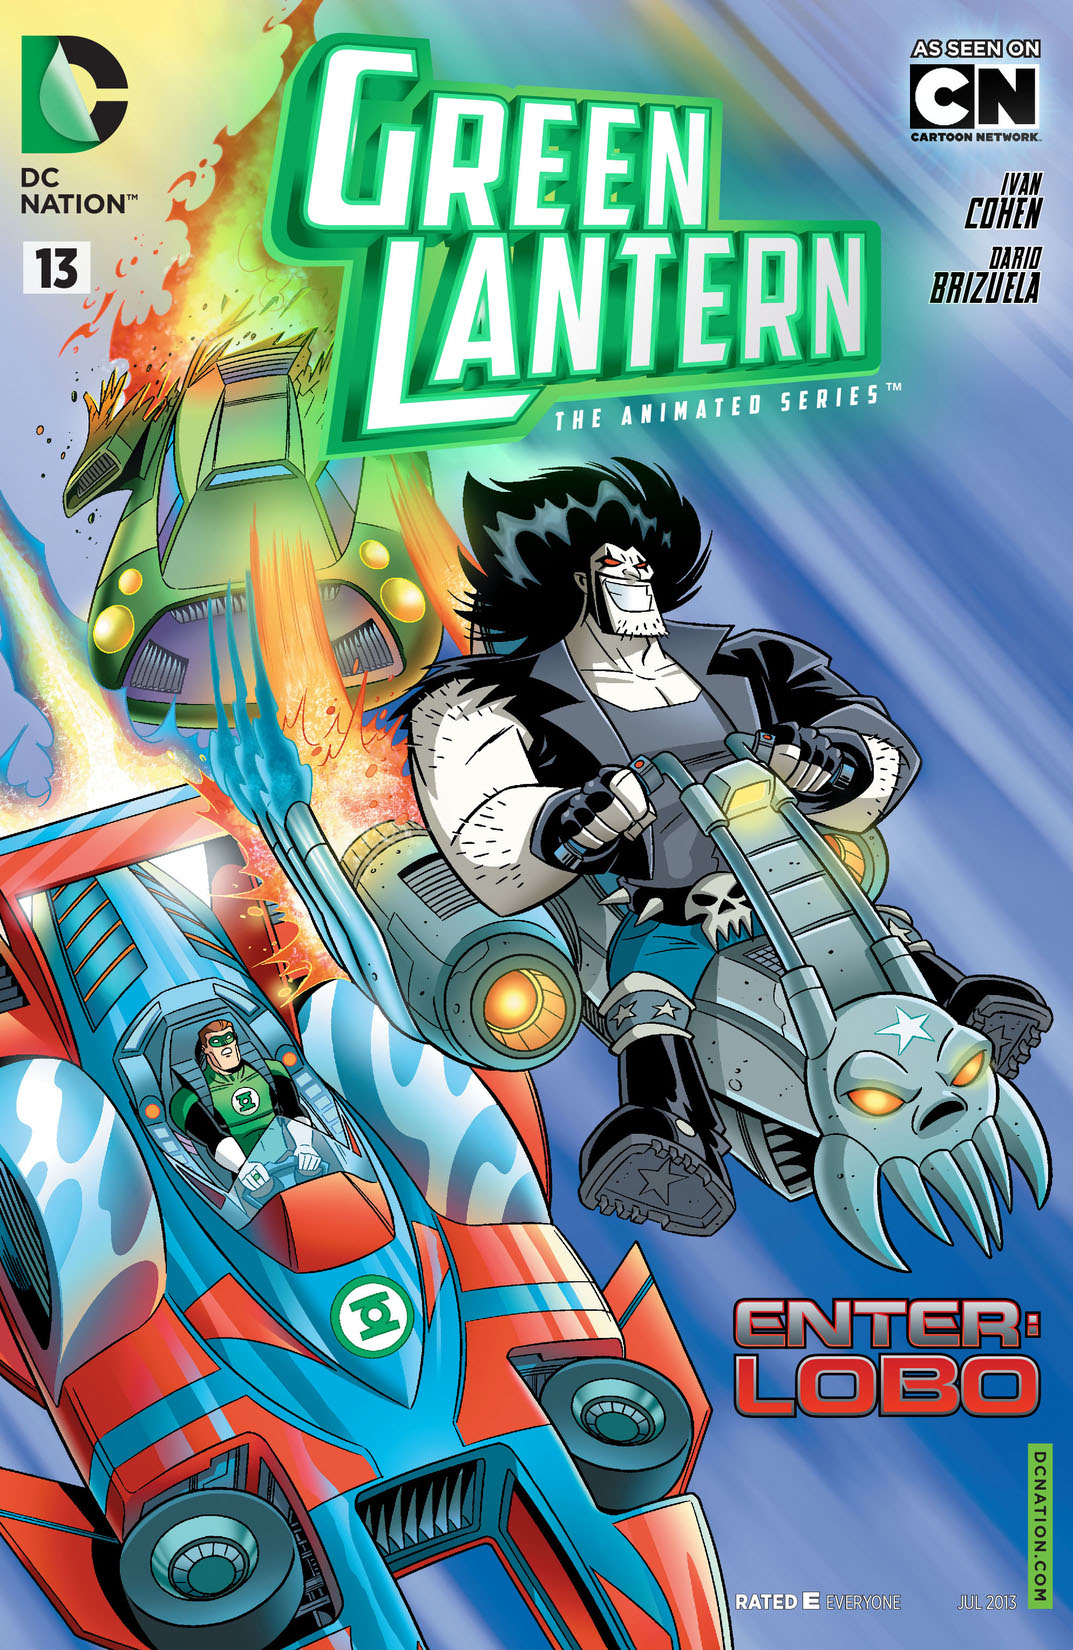 Green Lantern: The Animated Series #13 preview images